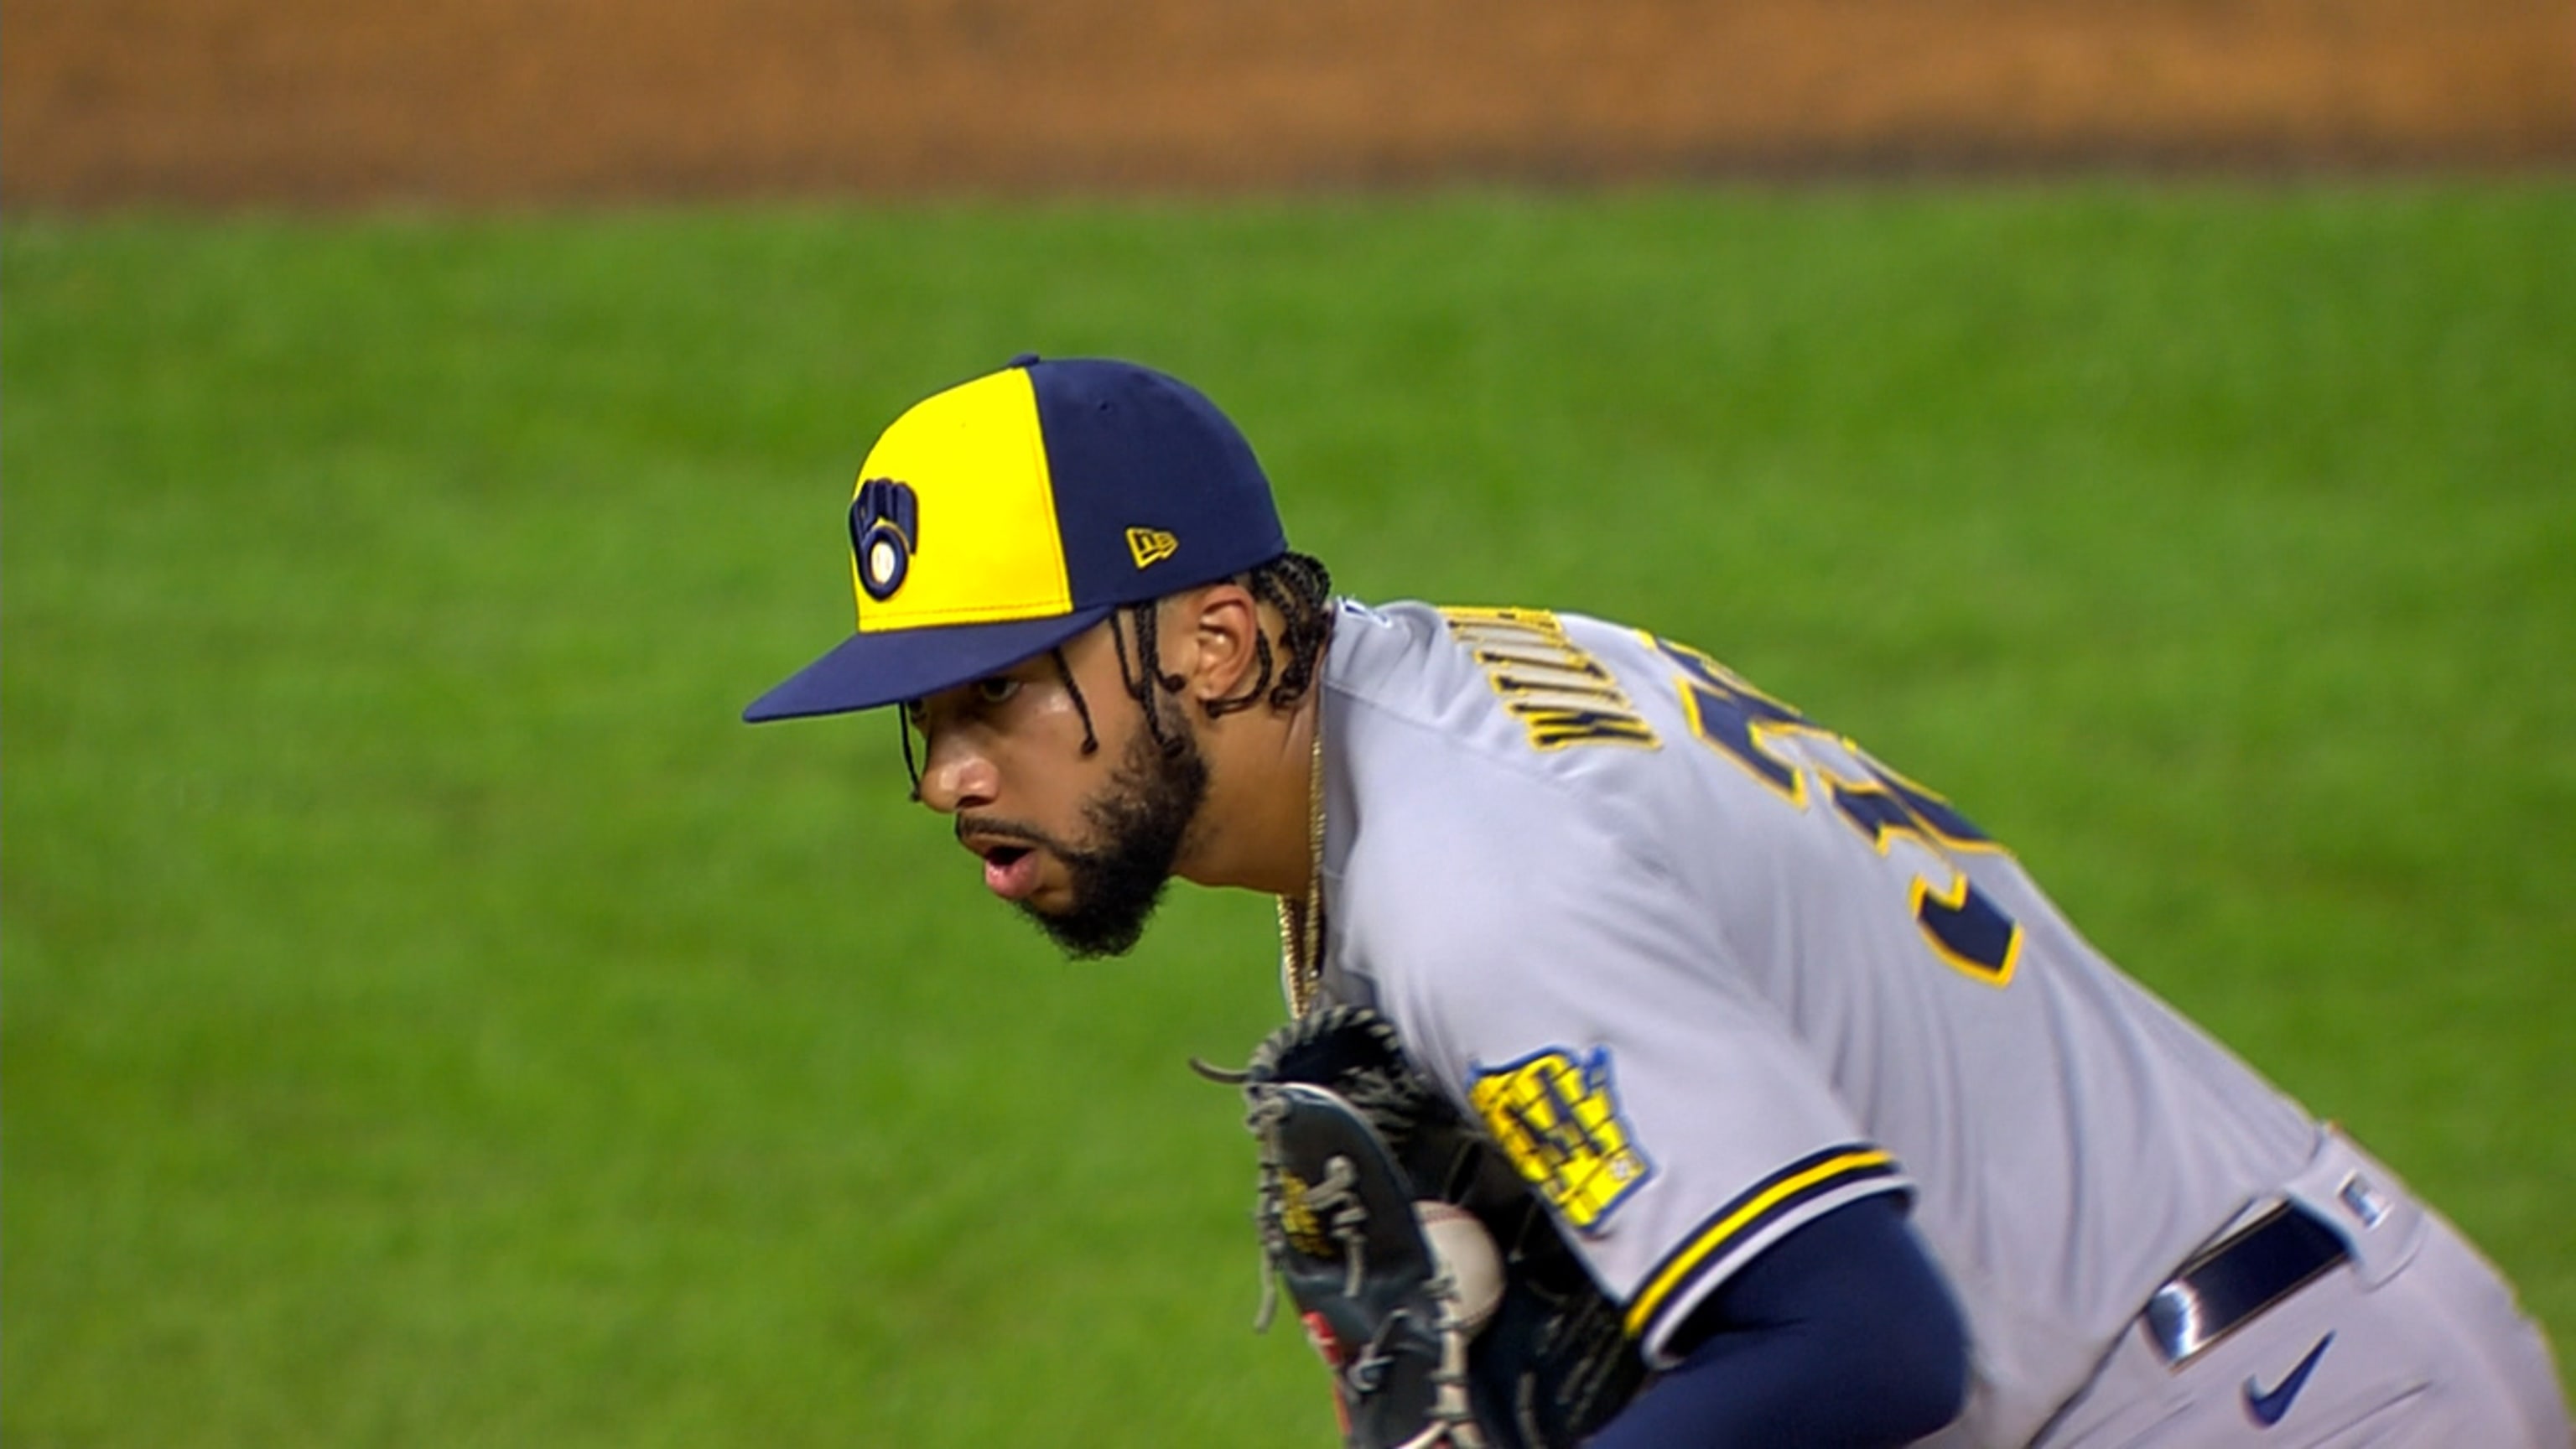 It's official: Brewers' reliever Devin Williams is an all-star